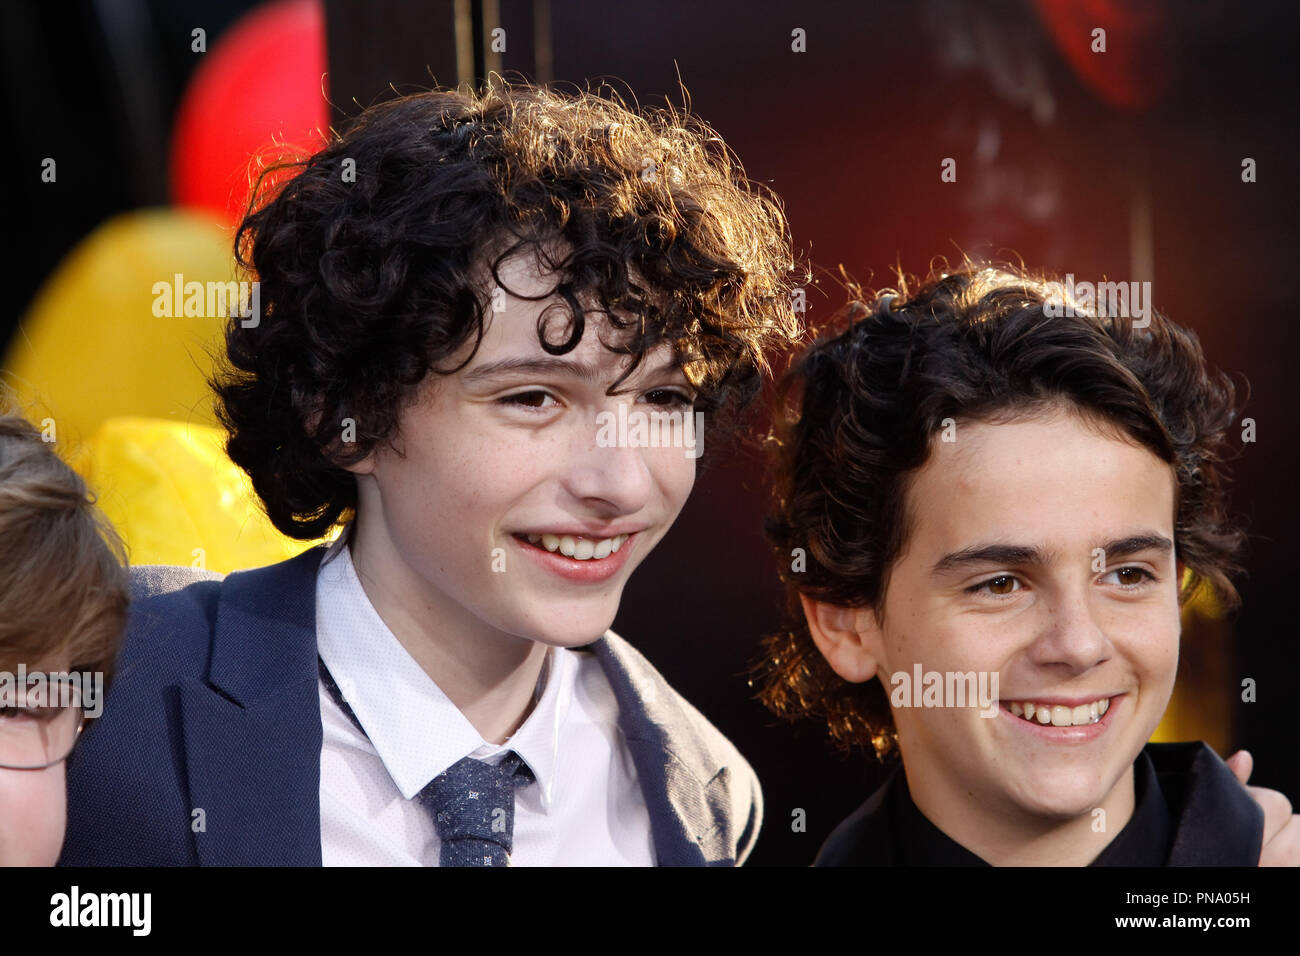 Finn Wolfhard, Jack Dylan Grazer at the World Premiere of New Line Cinema's  "It" held at the TCL Chinese Theater in Hollywood, CA, September 5, 2017.  Photo by Joseph Martinez / PictureLux